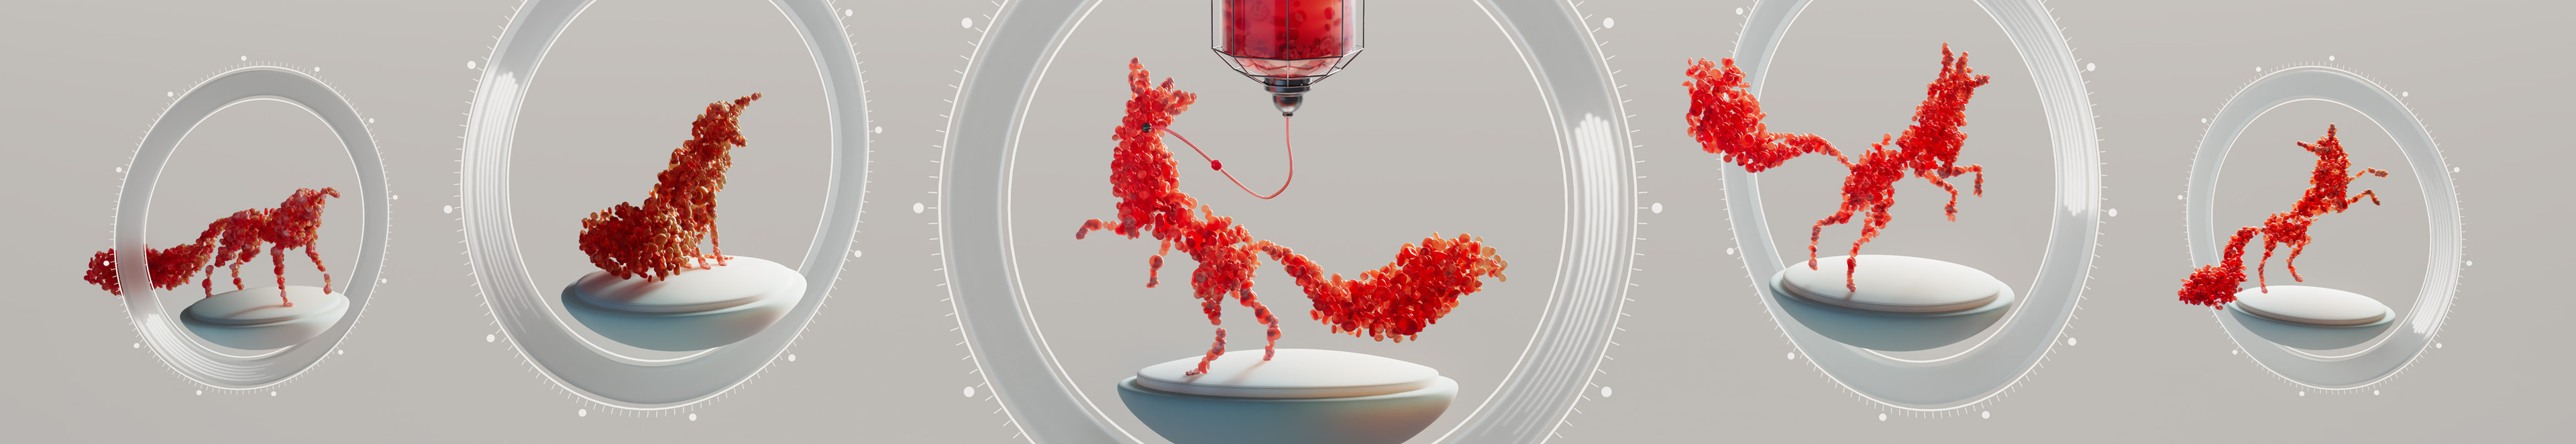 Sculpted &amp; posed foxes using ZBrush, then filled their silhouettes with blood cells with X Particles. Each fox’s clock indicates age.